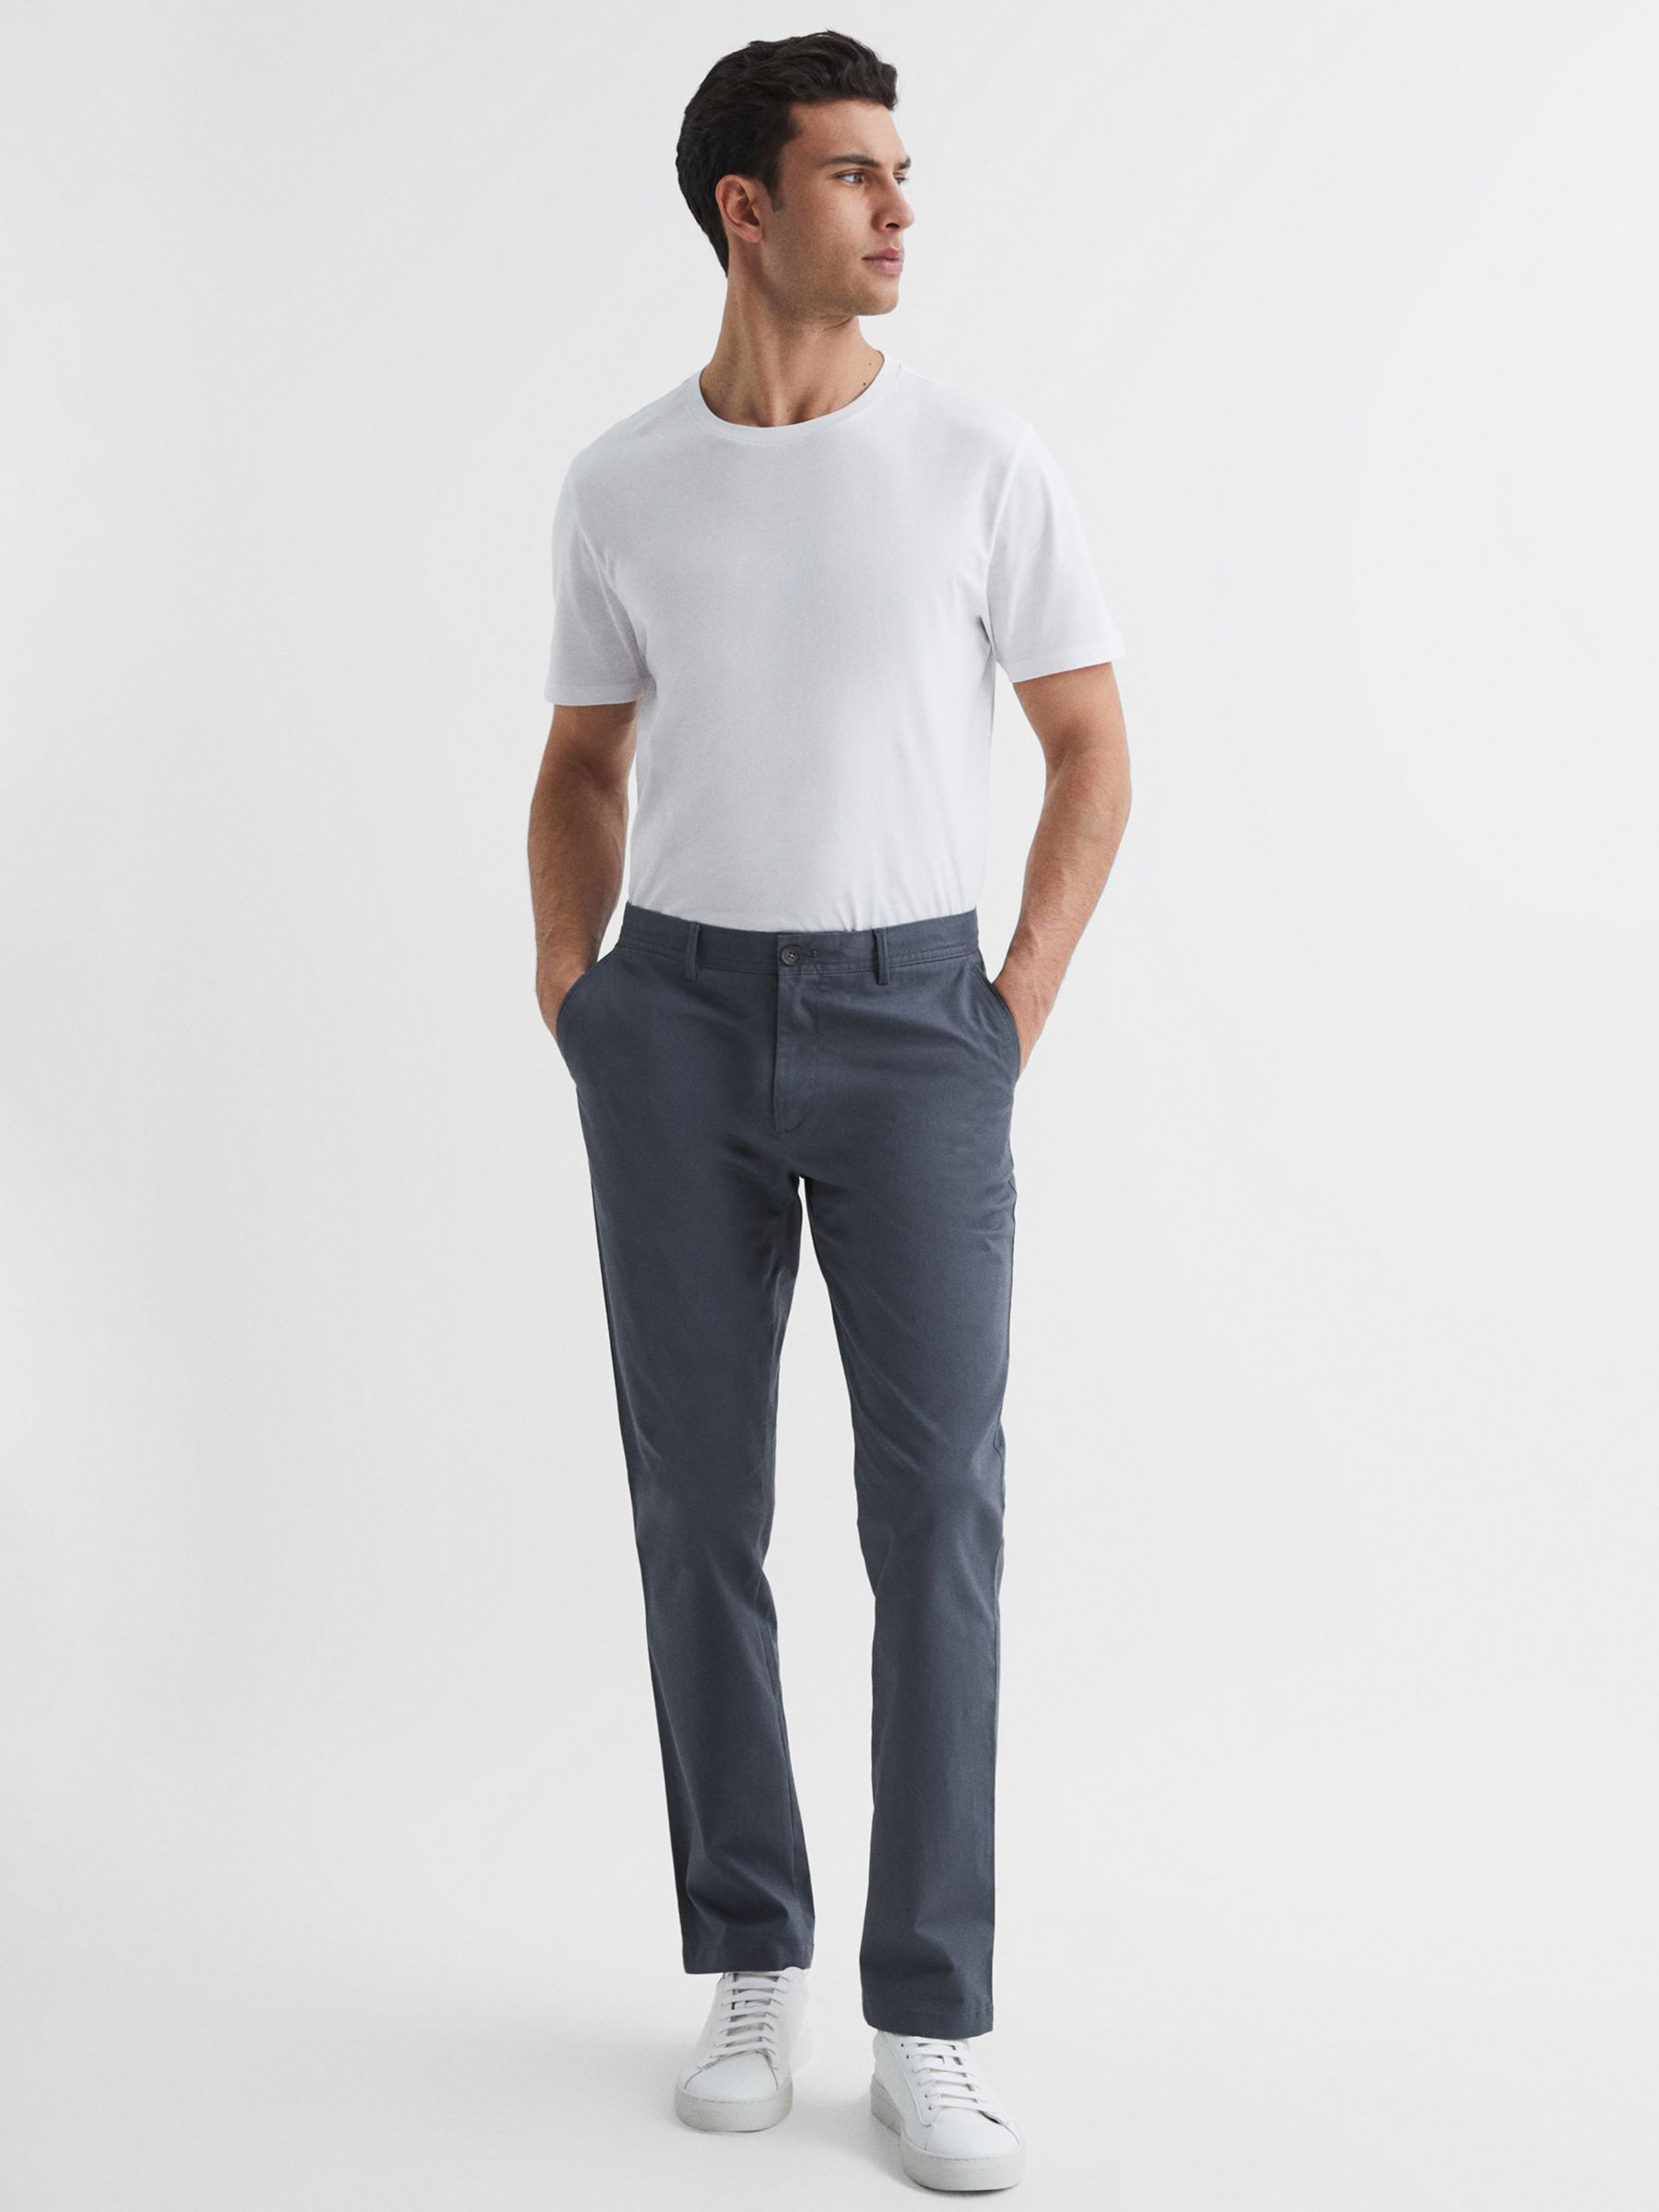 Reiss Pitch Slim Fit Stretch Cotton Chino Trousers, Airforce Blue, 30R